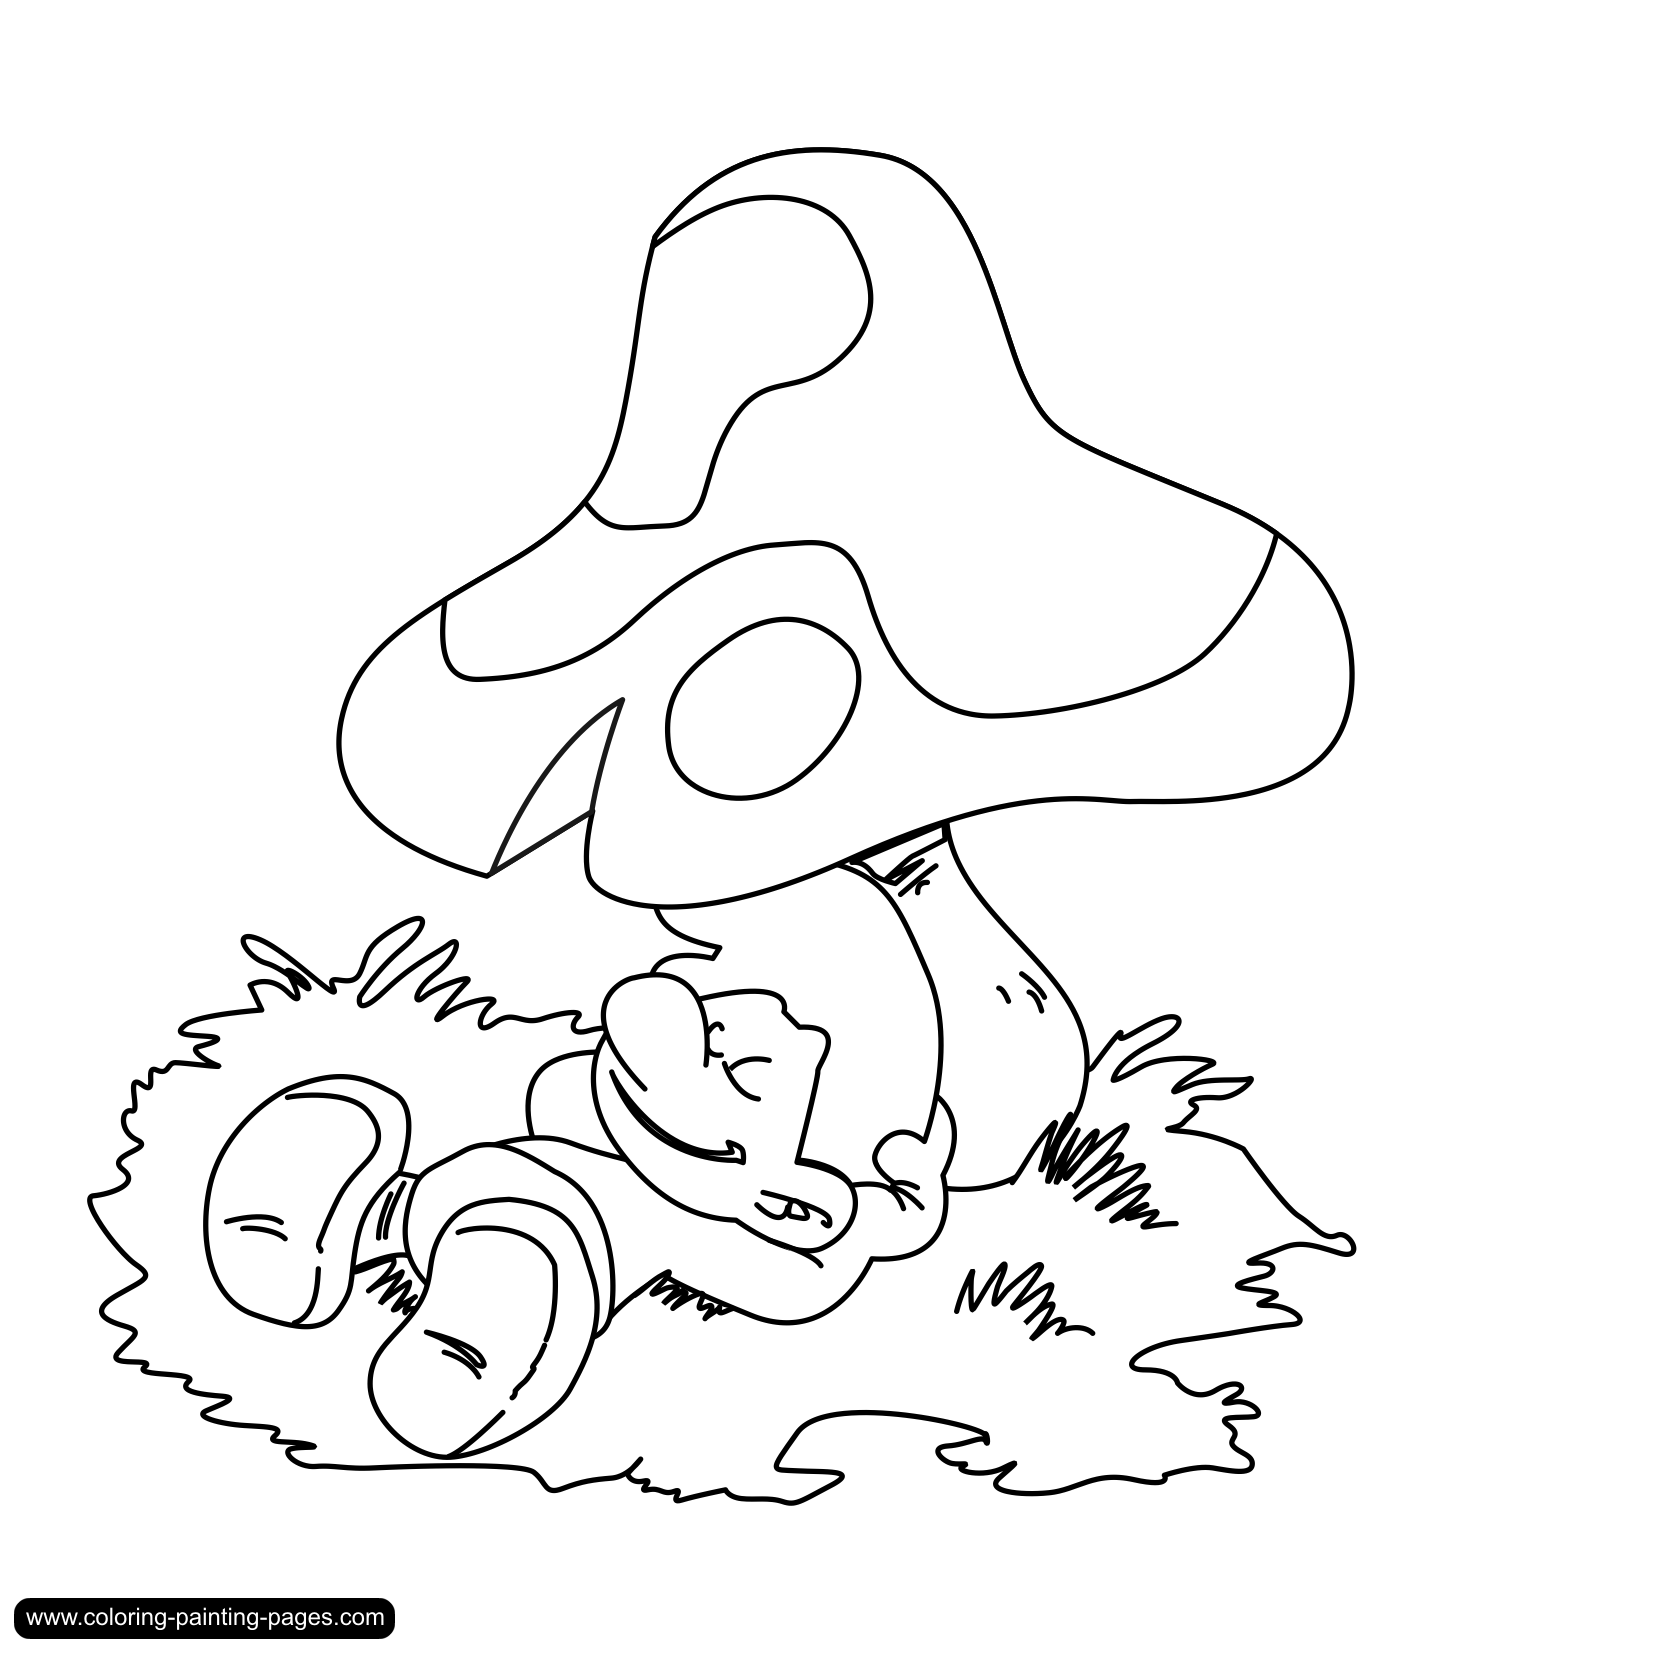 smurfs coloring pages free - photo #47